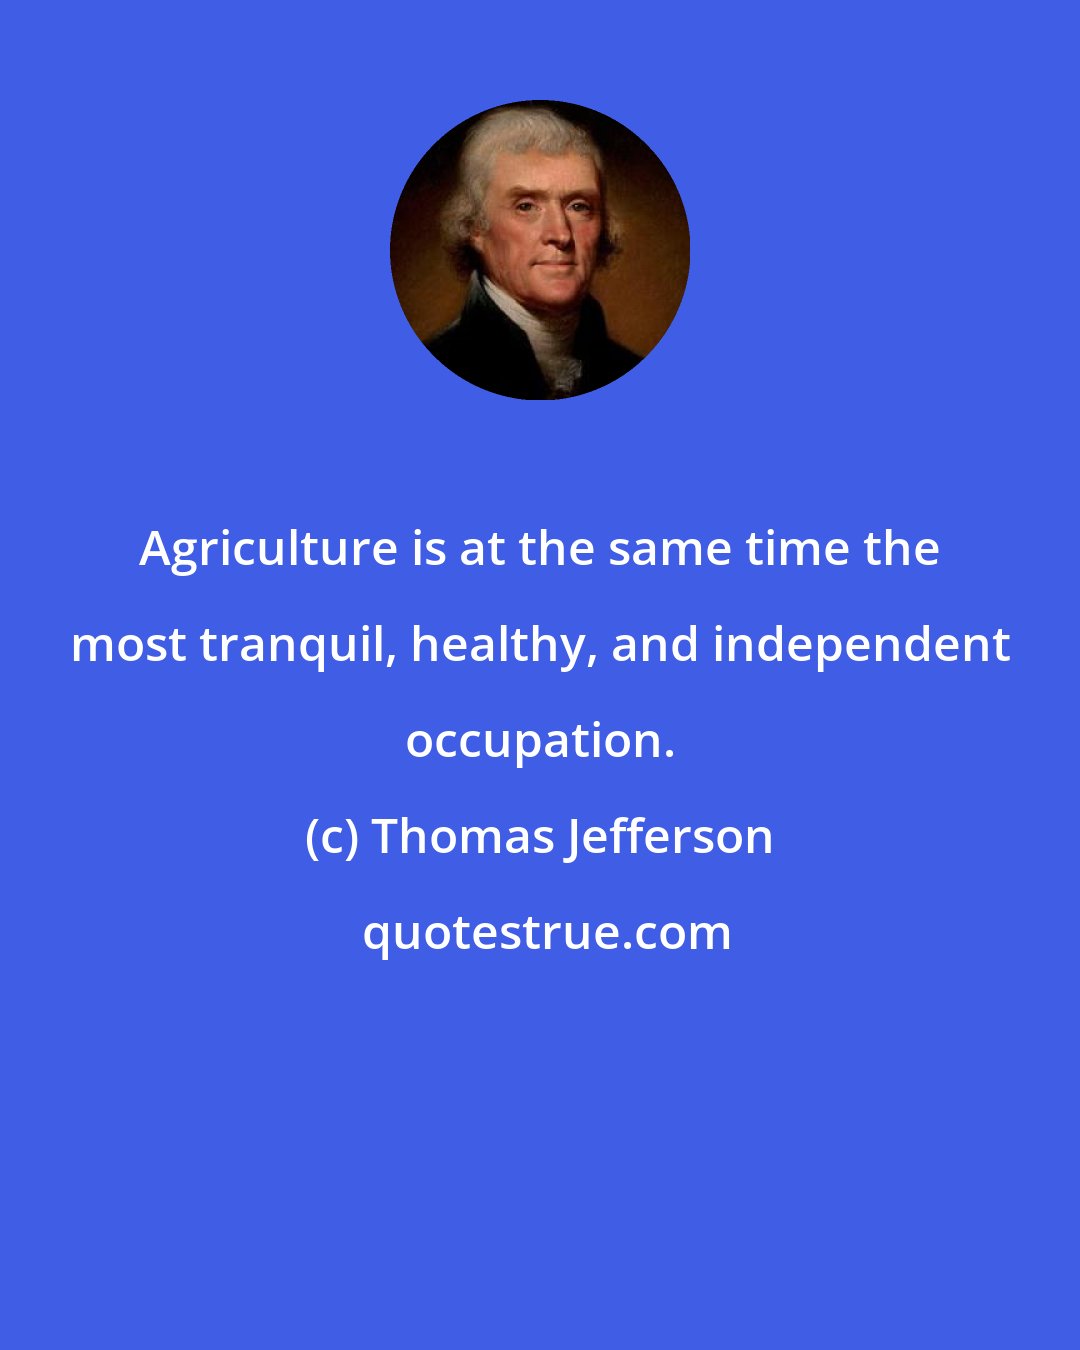 Thomas Jefferson: Agriculture is at the same time the most tranquil, healthy, and independent occupation.